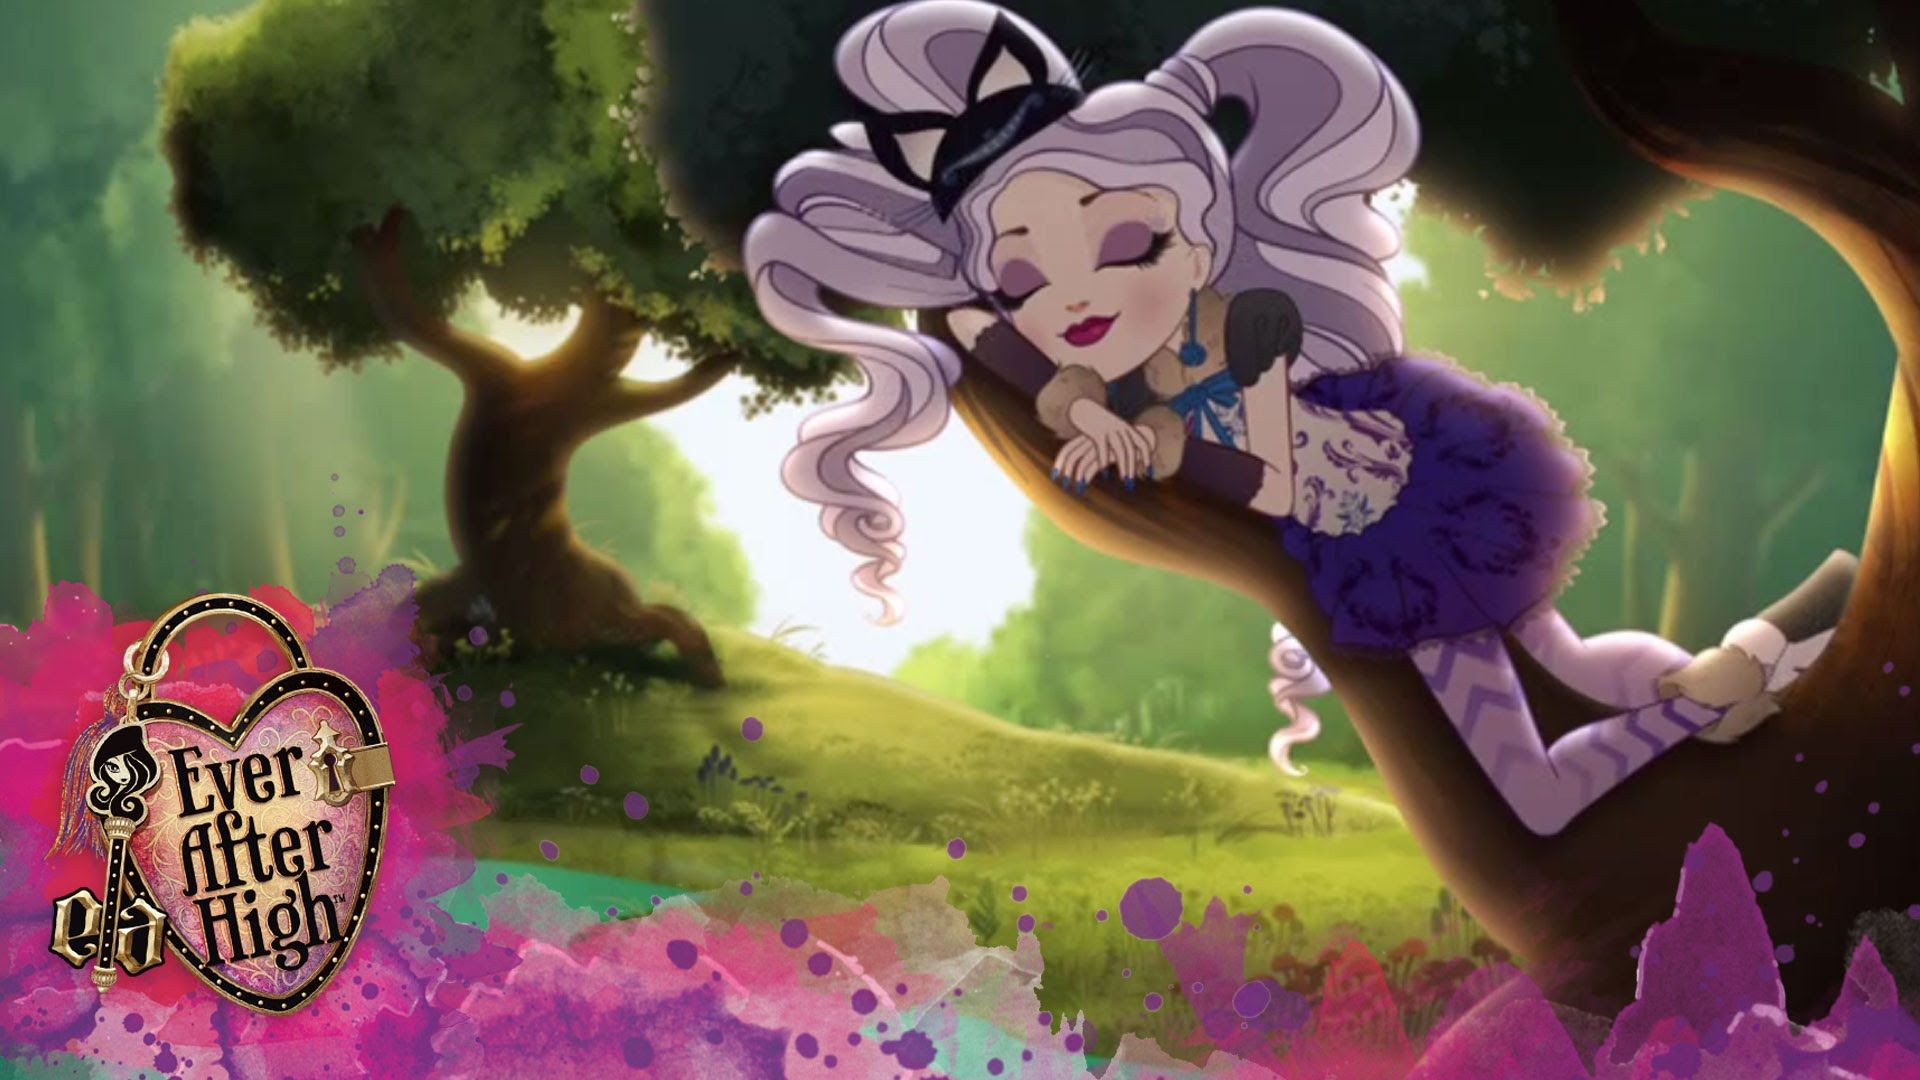 Ever After High Kitty Cheshire Cartoon Wallpaper